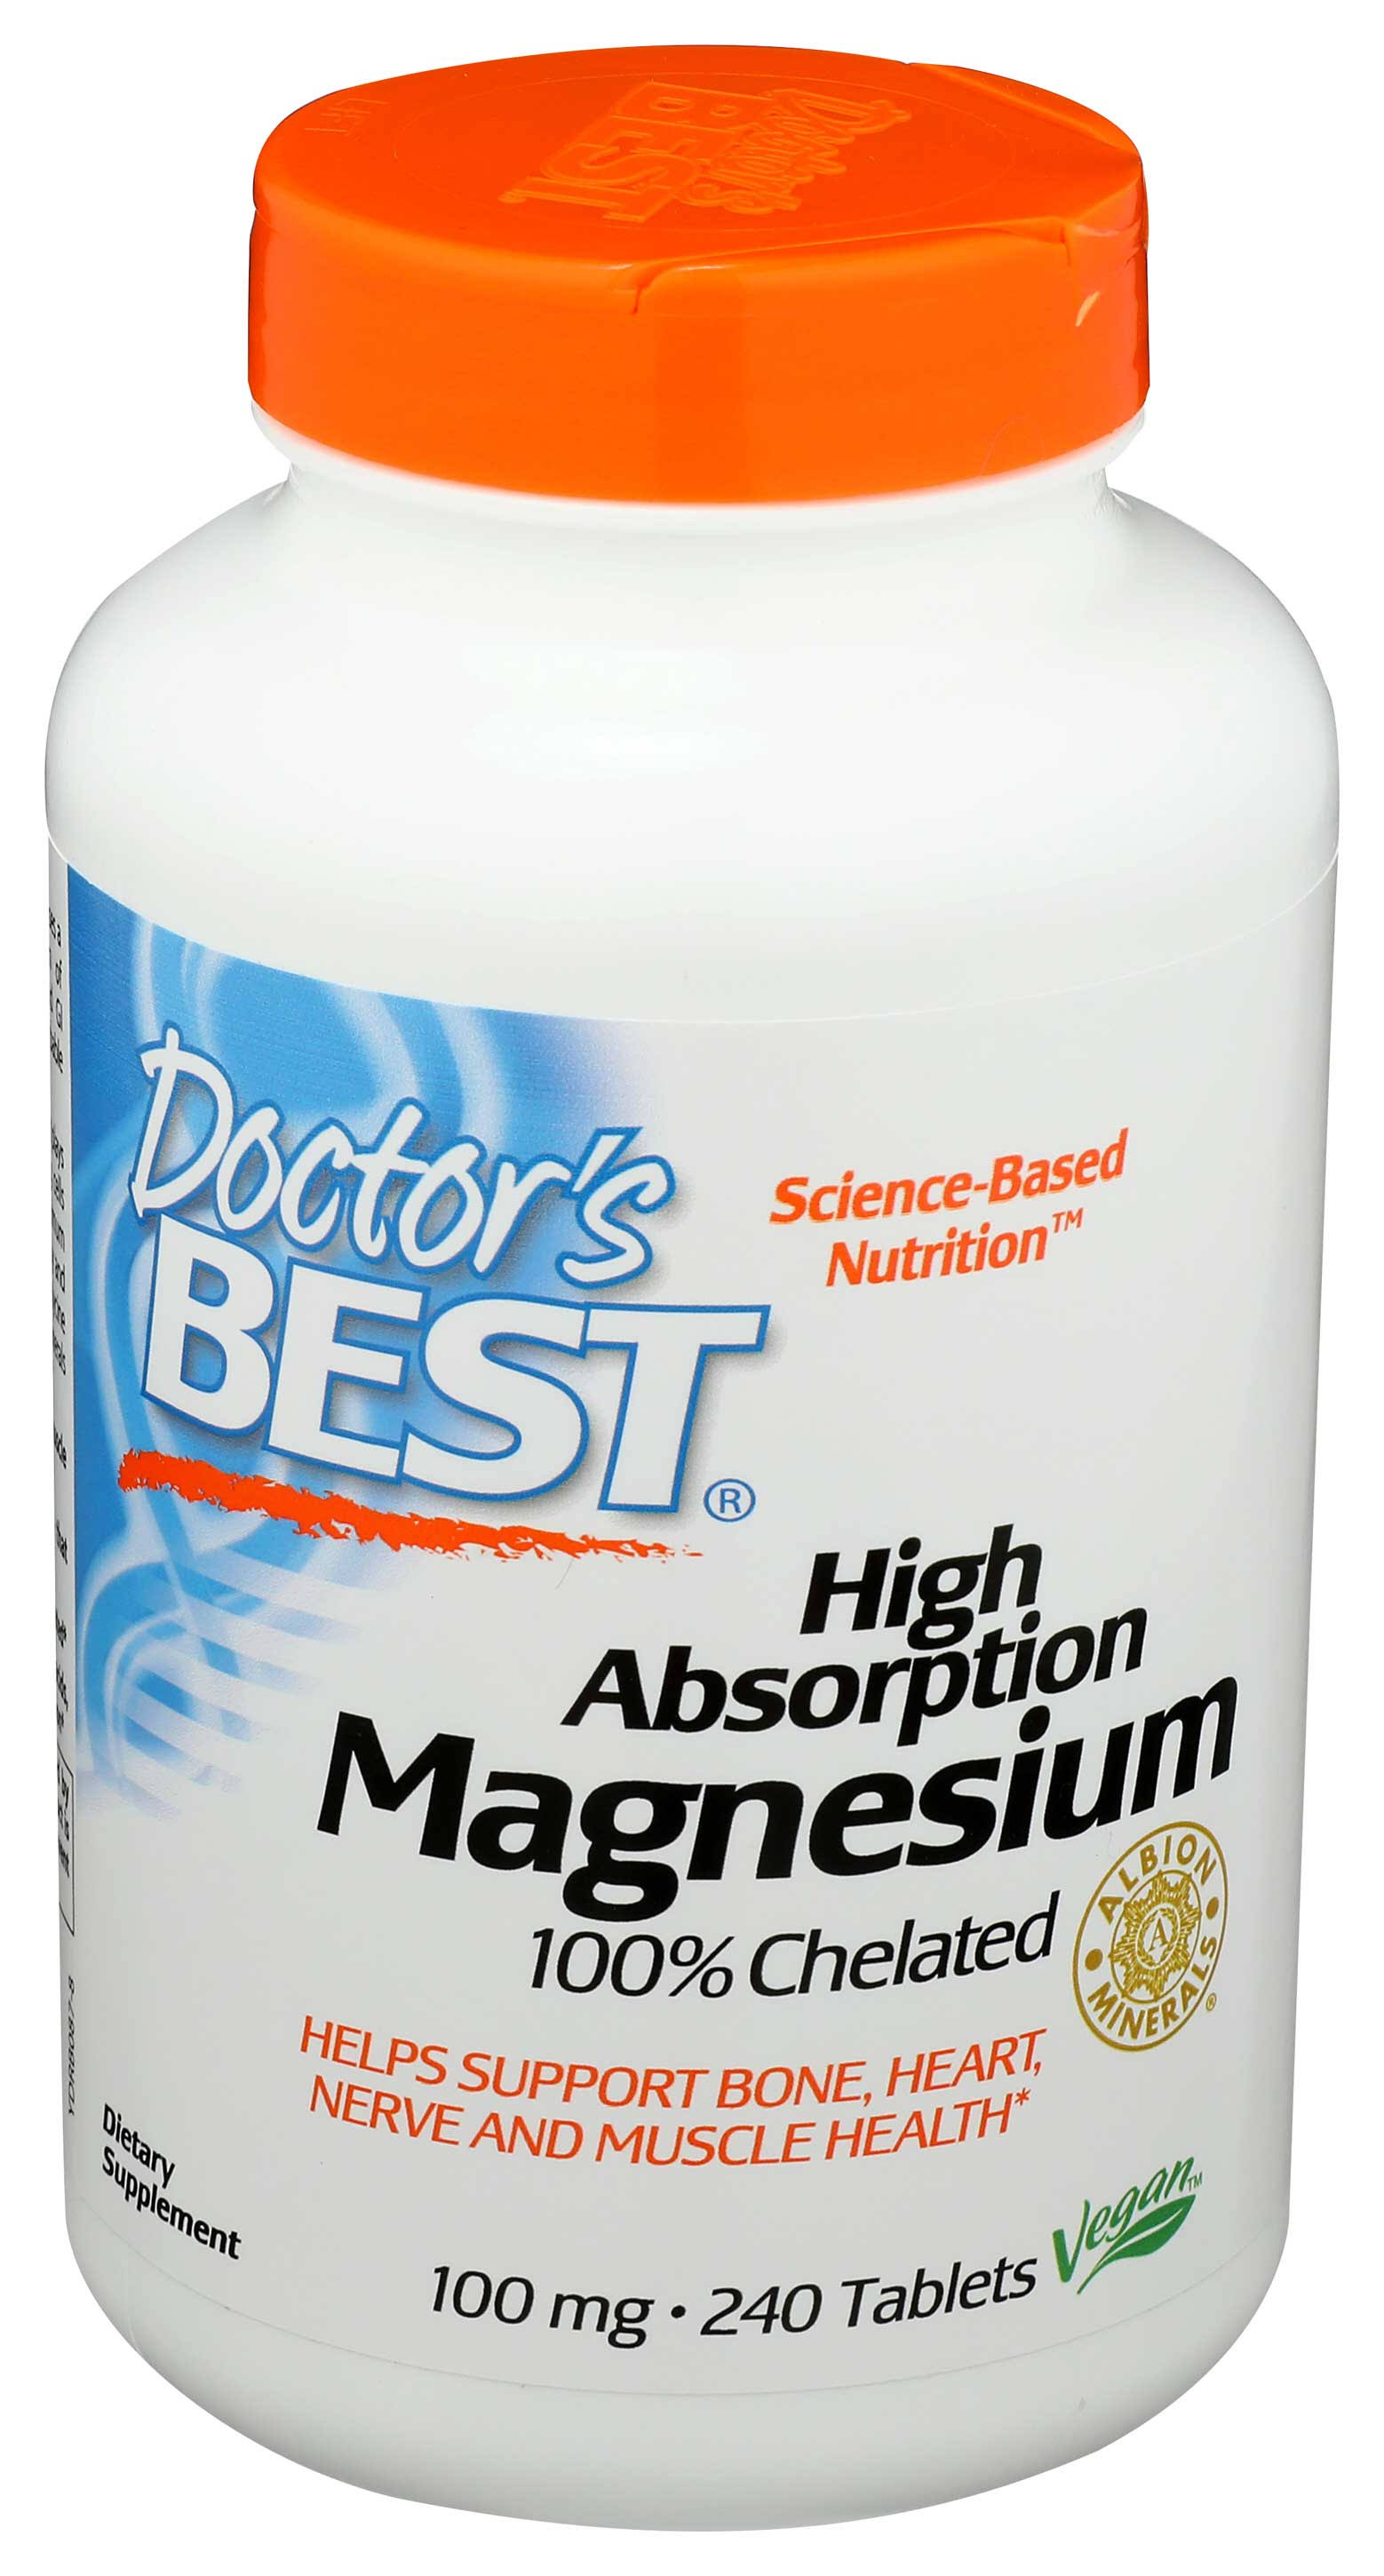 Doctor's Best 100% Chelated Magnesium - 240 Tablets